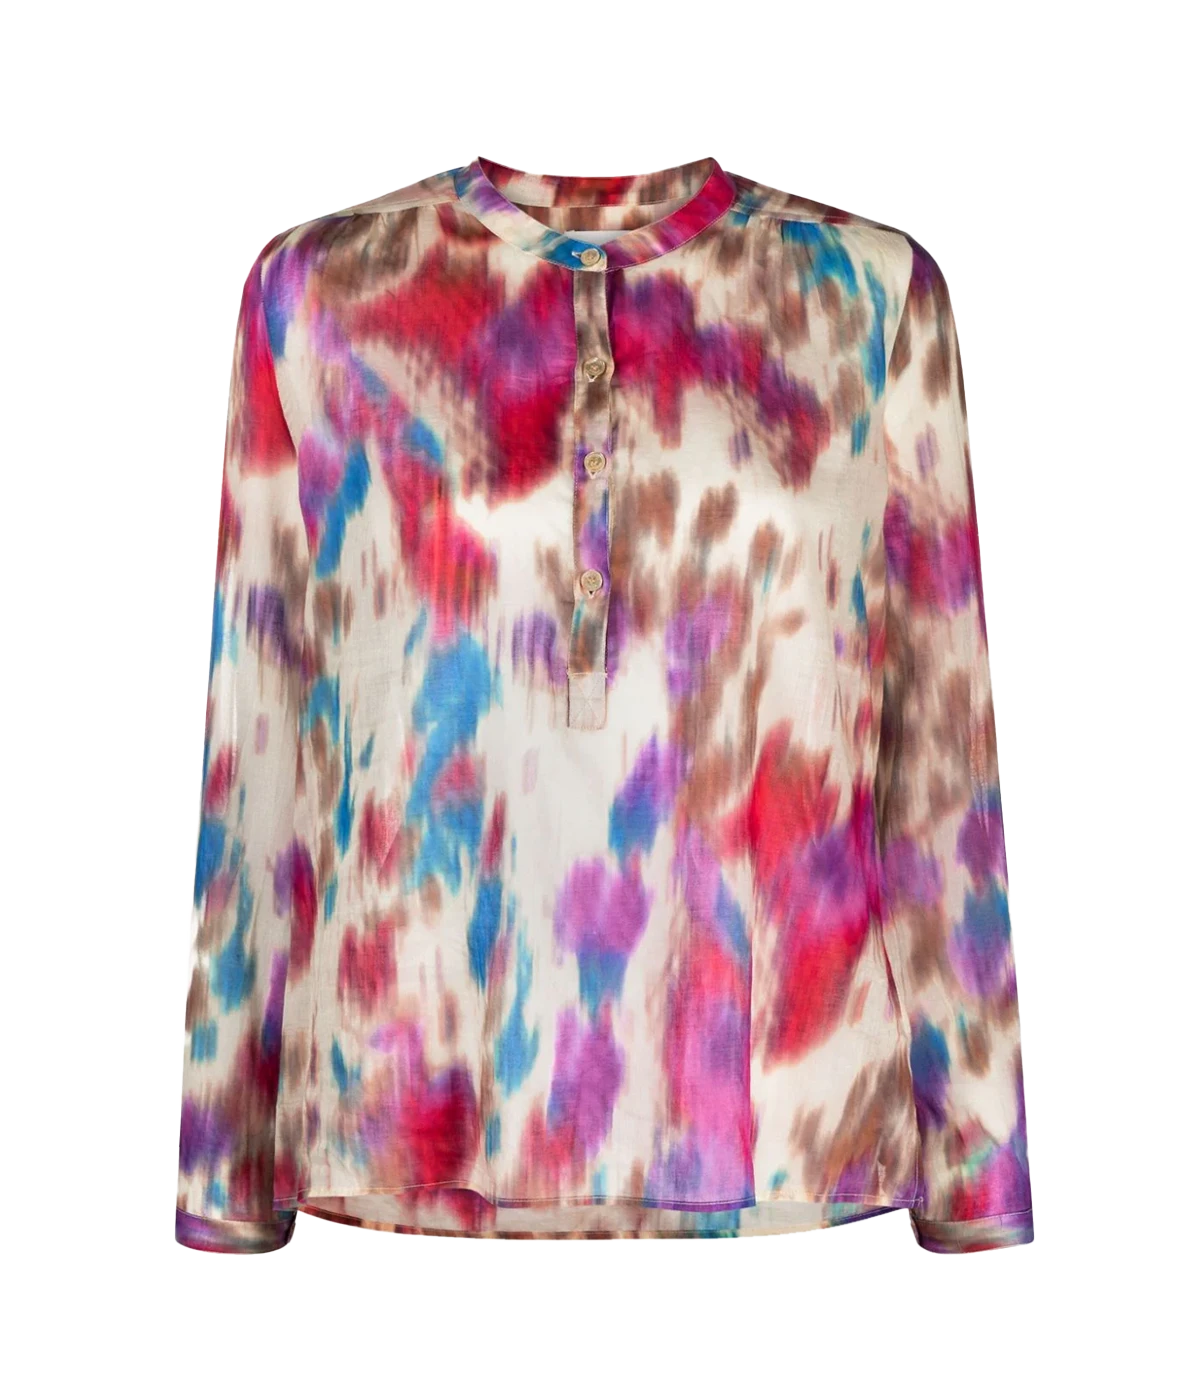 Isabel Marant blouse cut from 100% organic cotton. High low hem and a multicolour beige and raspberry tie dye pattern. Crinkled finish with long button sleeves. Wash and wear, bra friendly. 